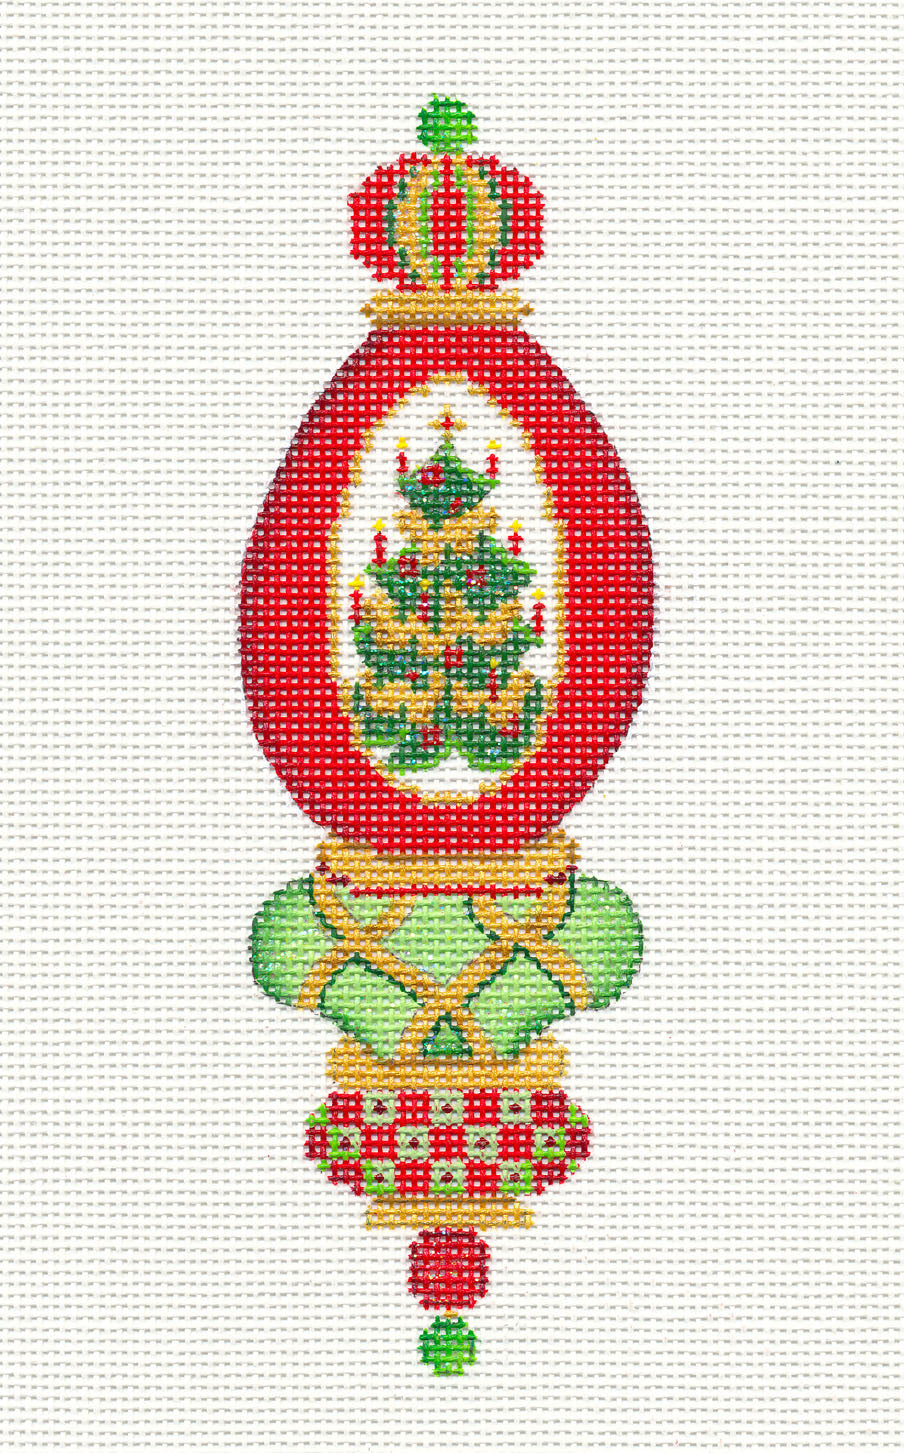 Ornament ~ Christmas Tree Green and Red Ornament handpainted Needlepoint Canvas by Strictly Christmas